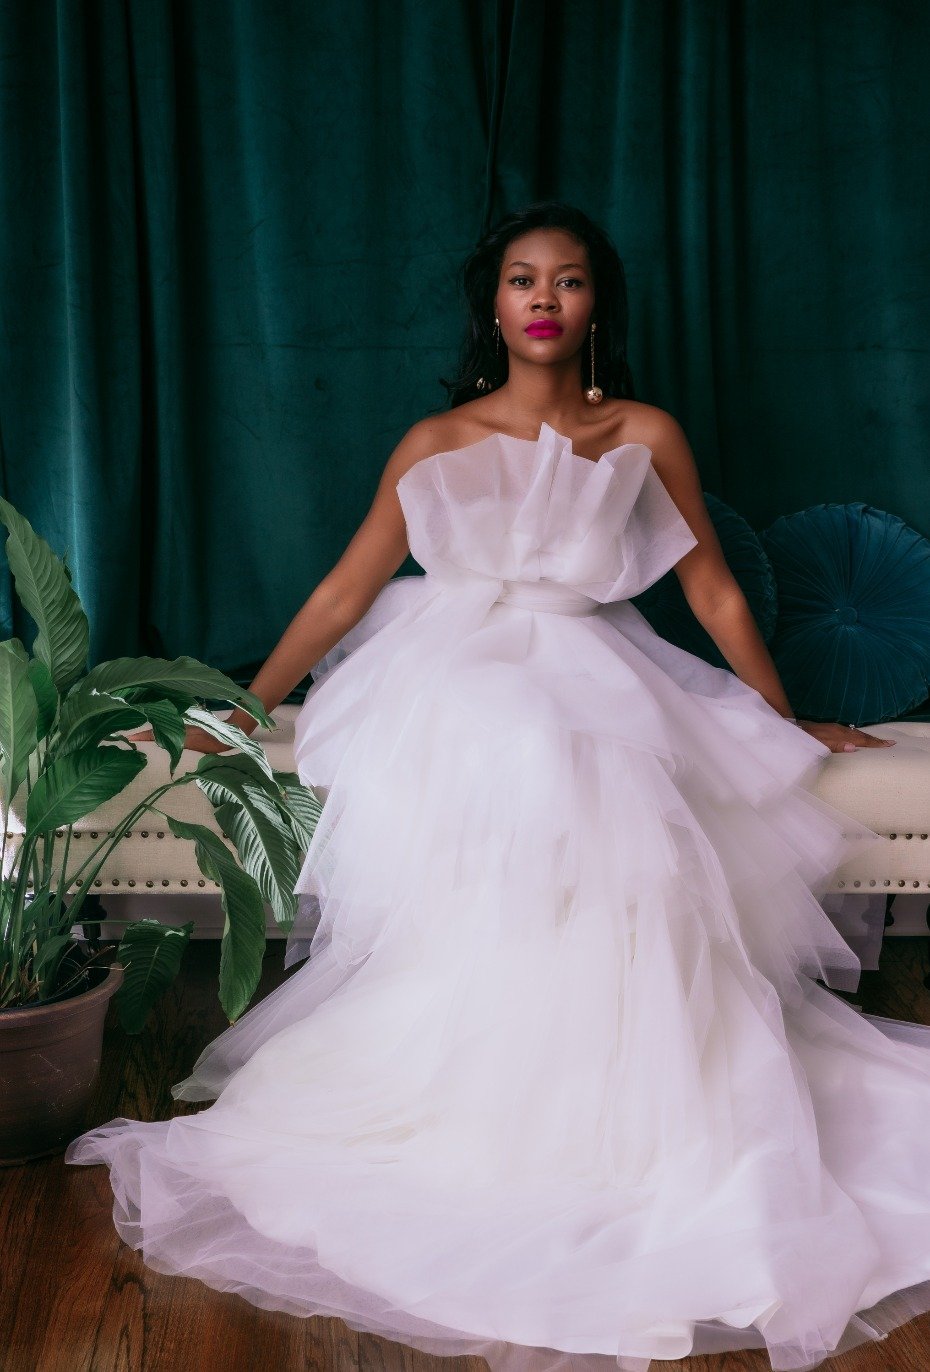 Project Runway's Laurie Underwood Launches New Collection Of Bridal Separates